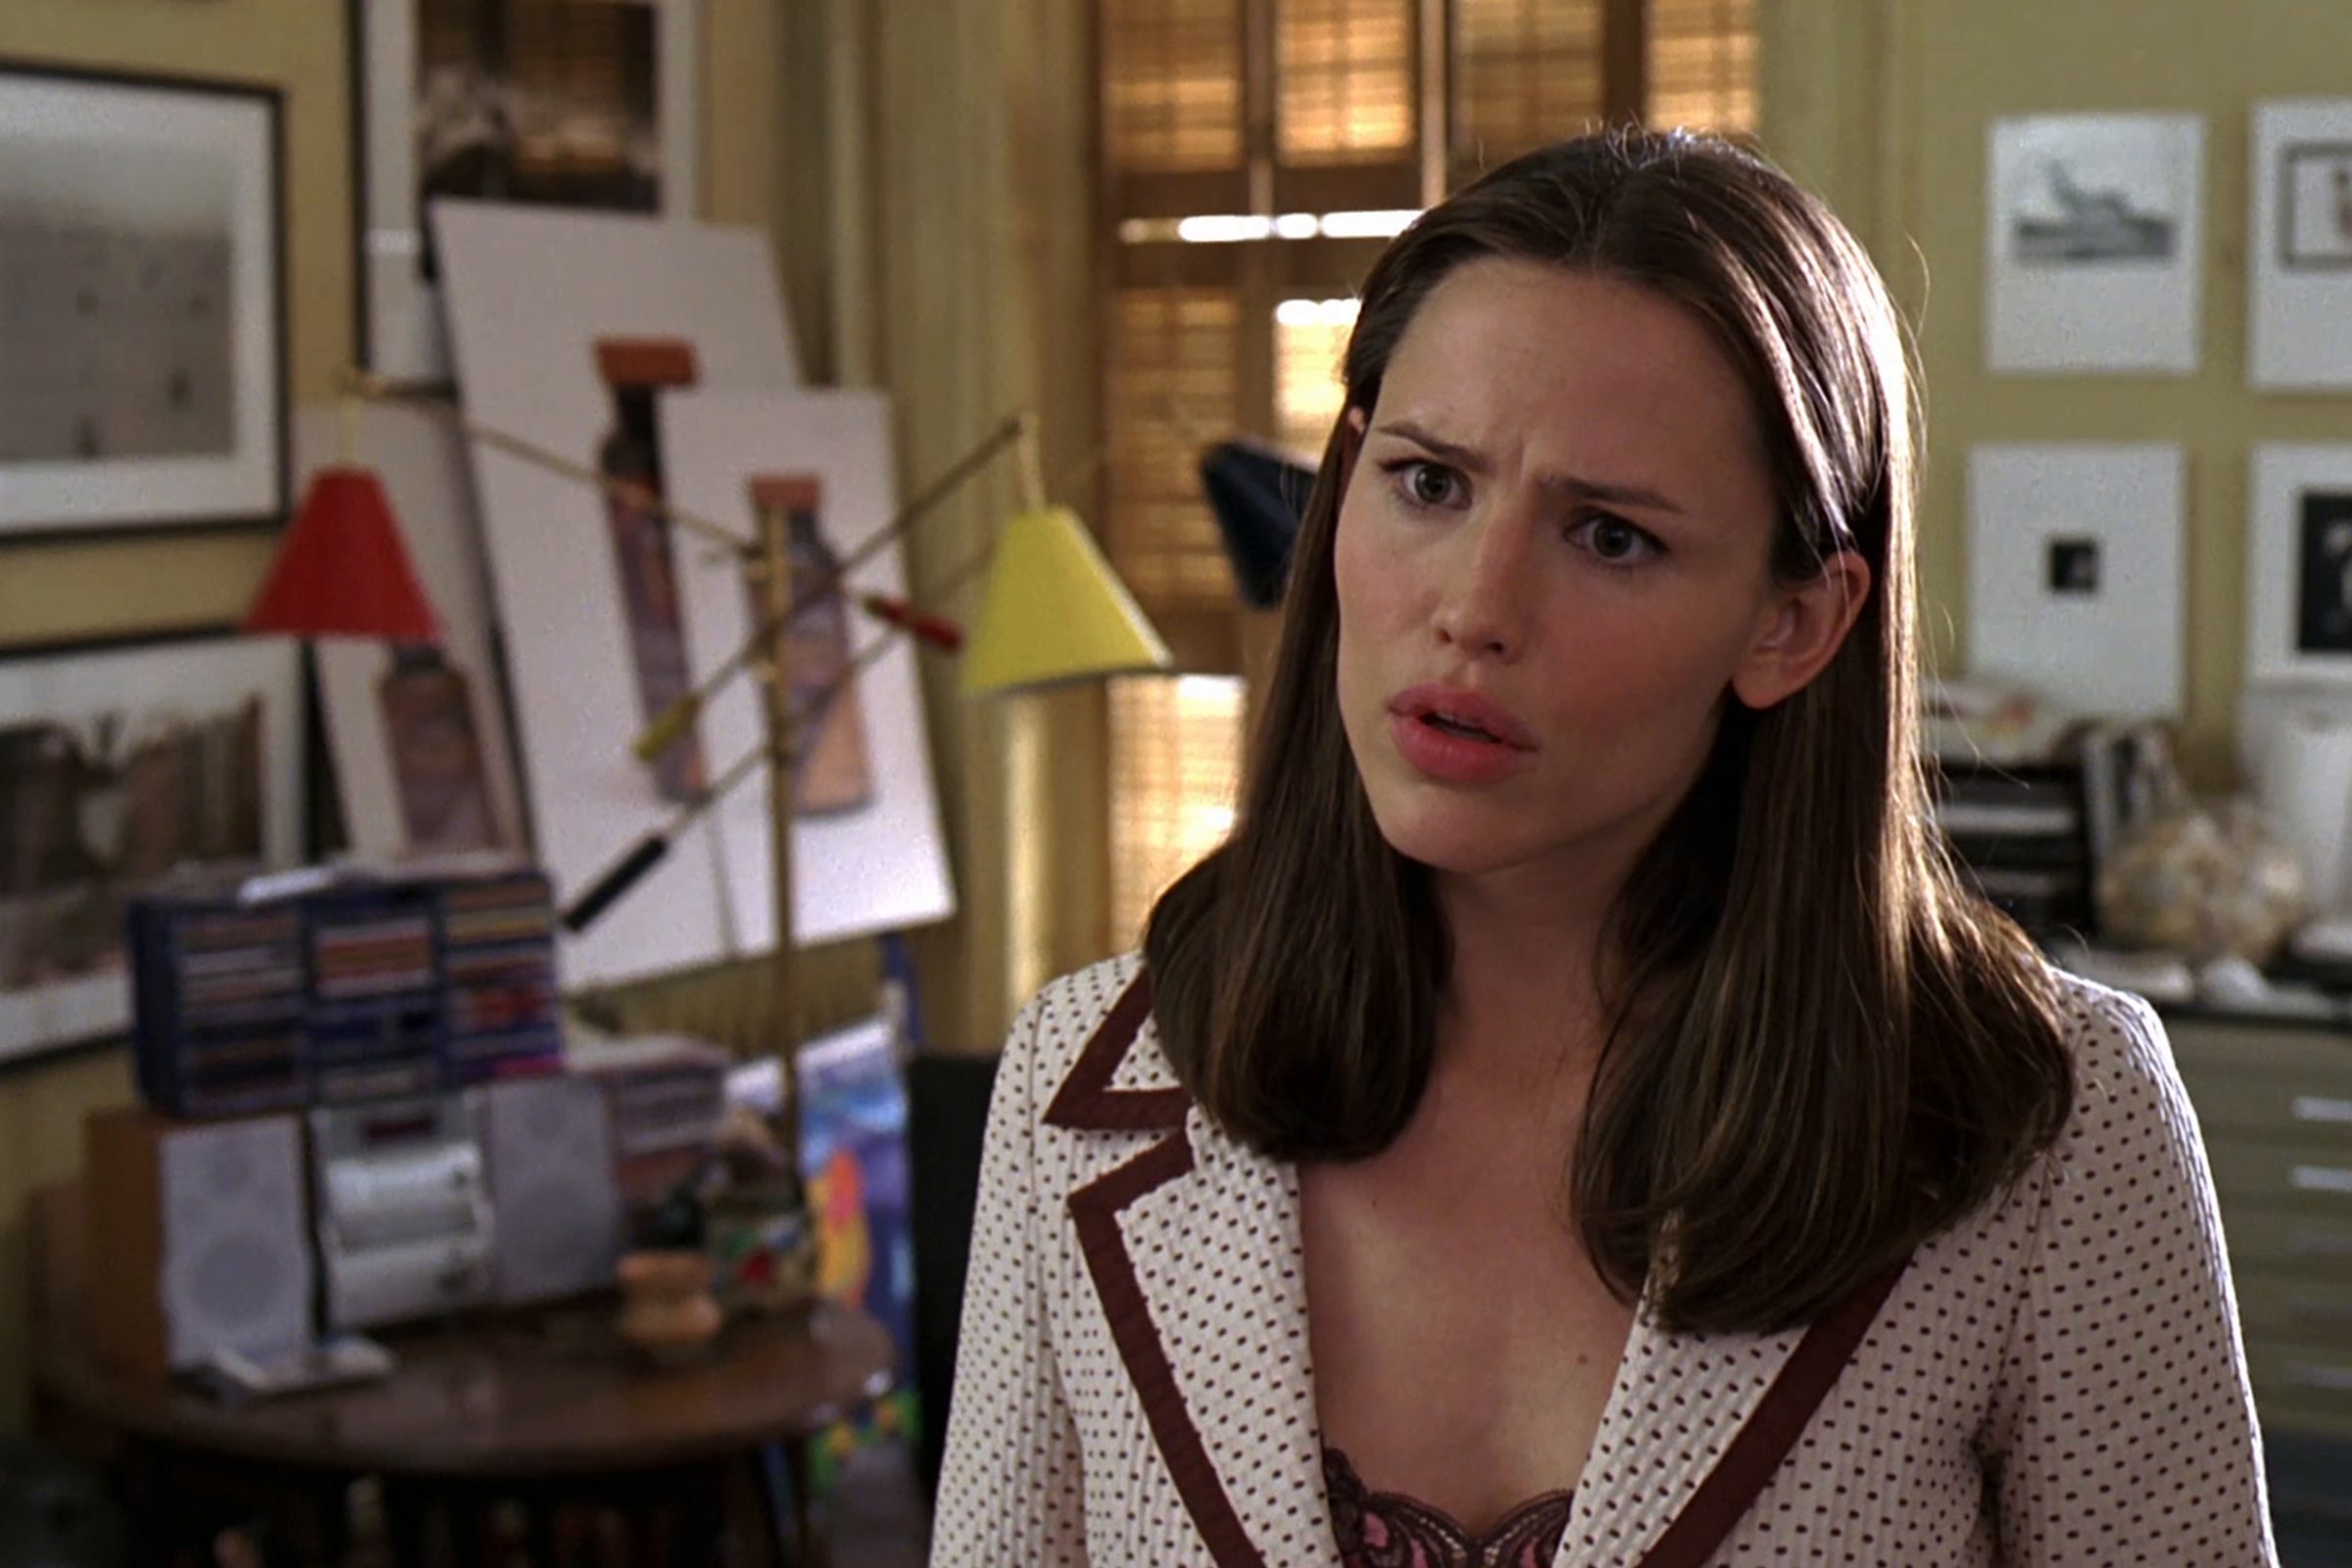 Scene from 13 Going On 30